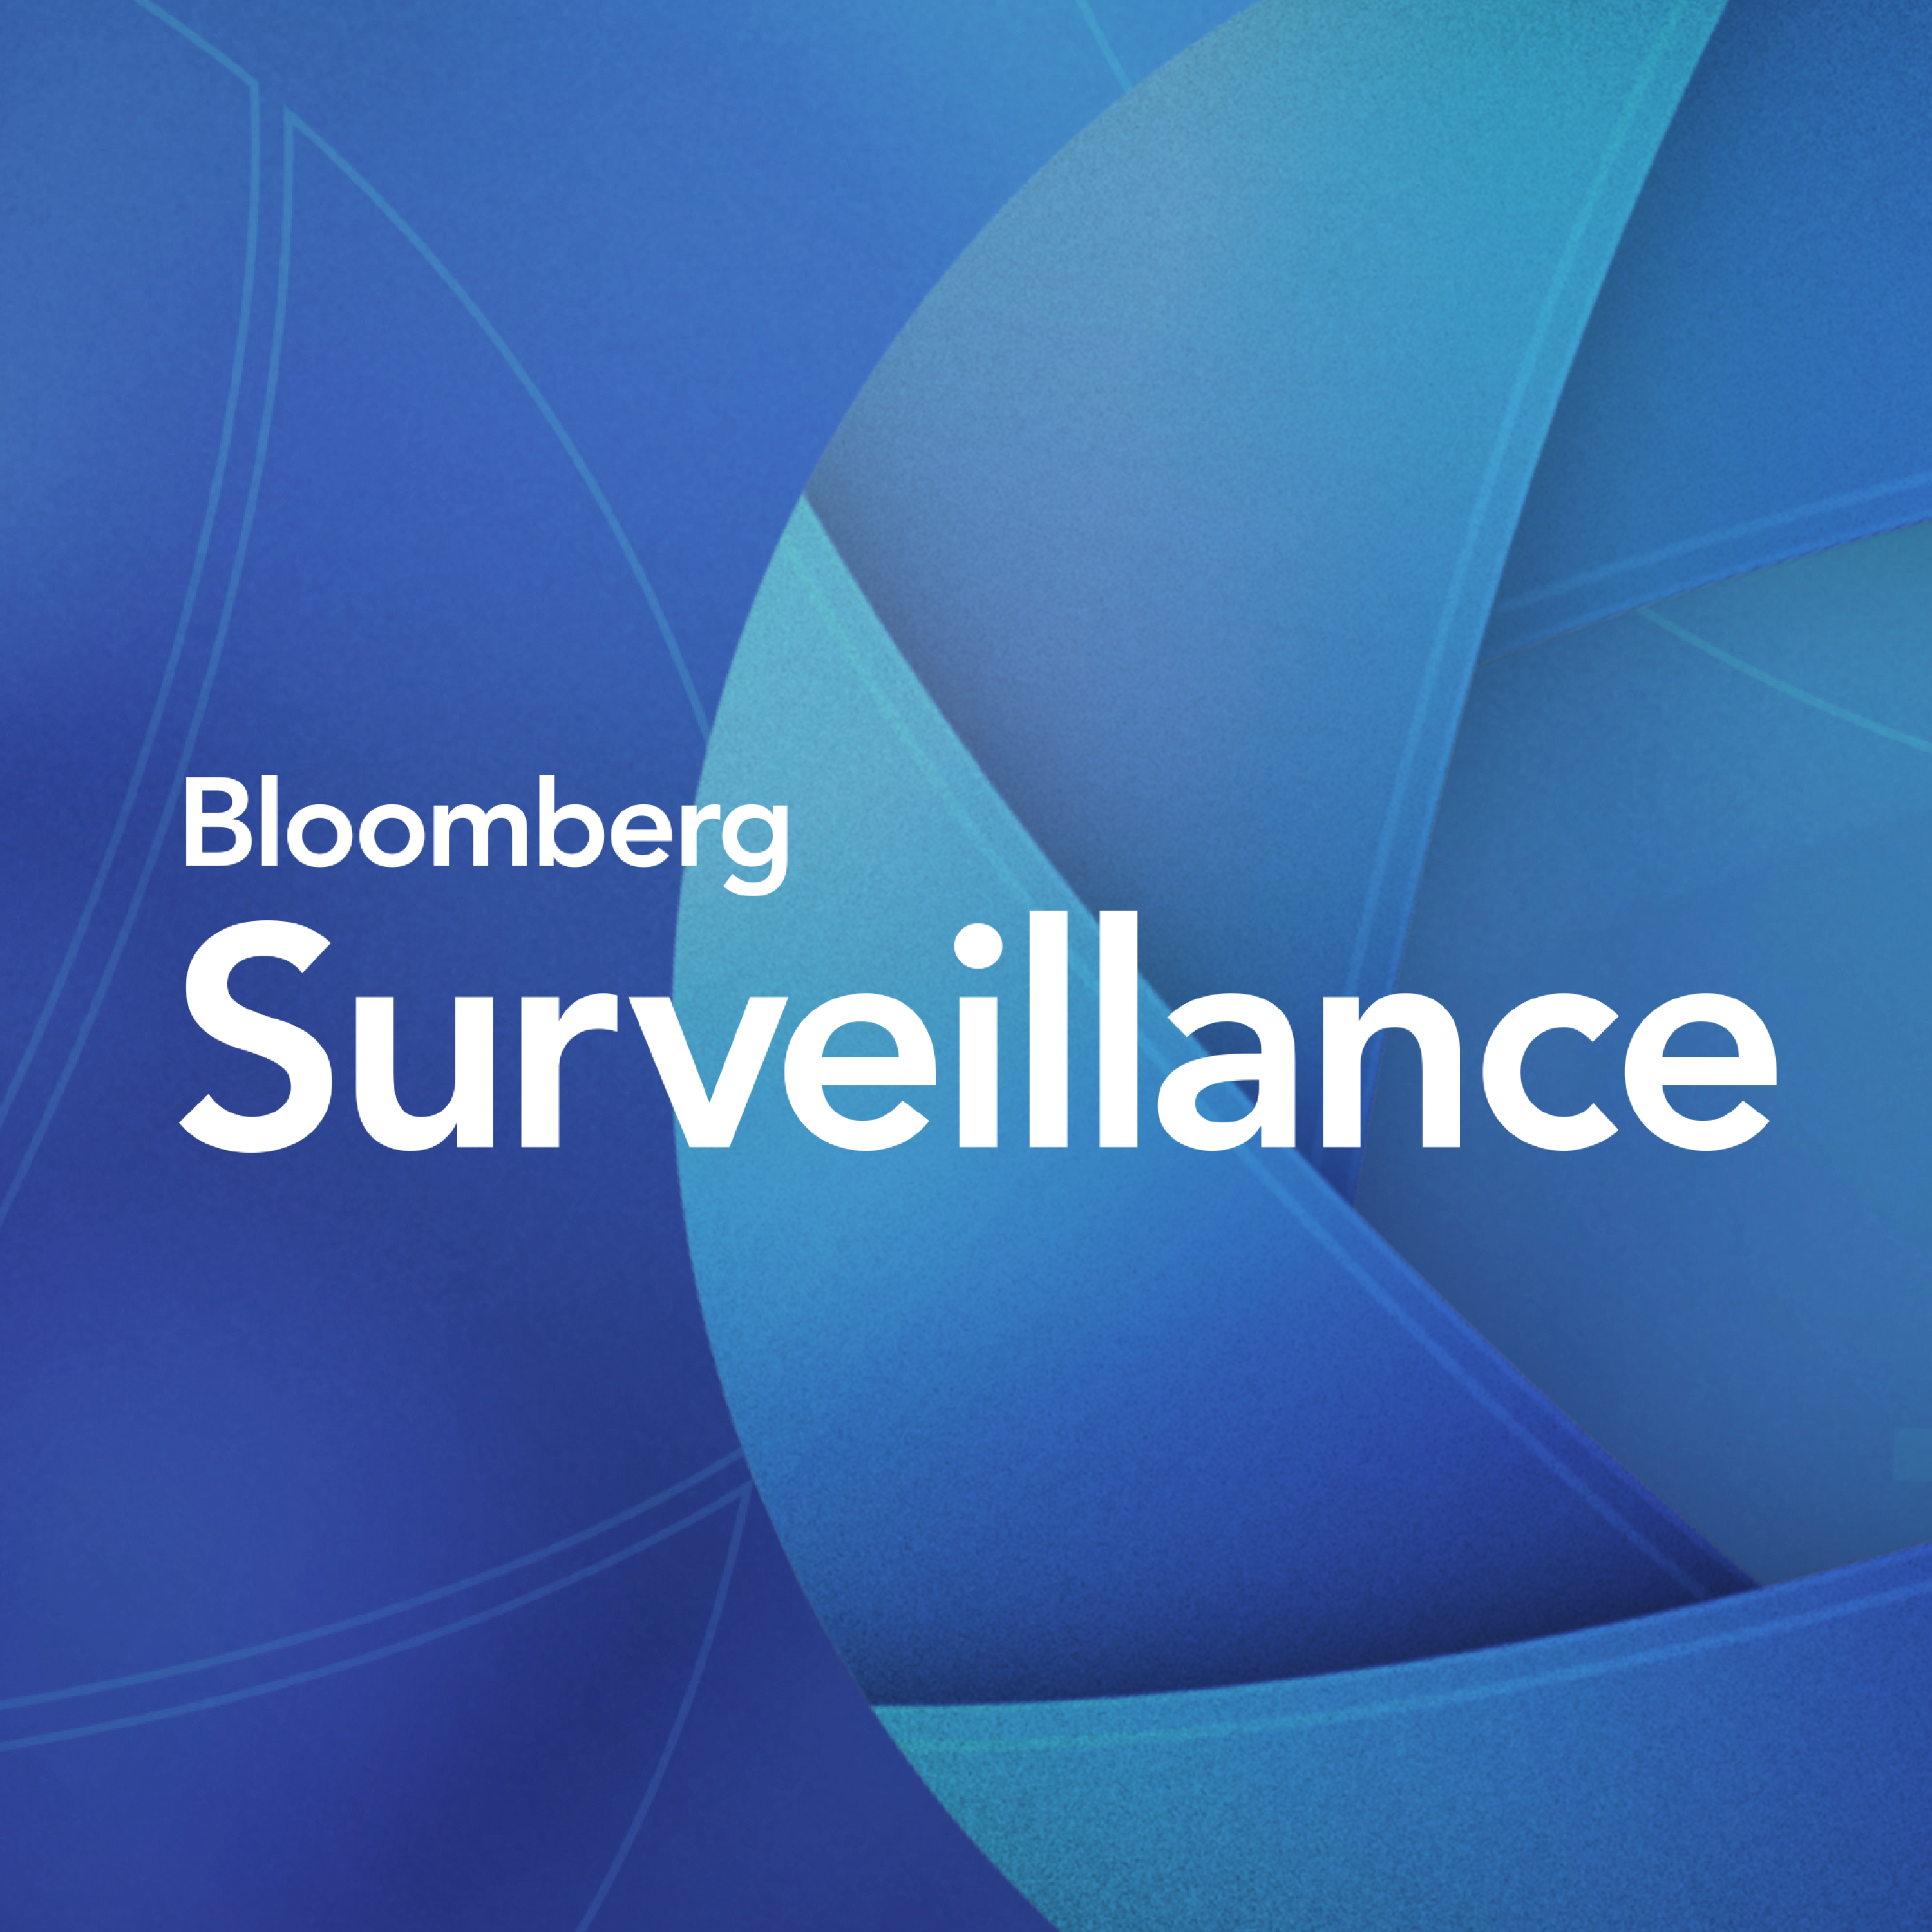 Bloomberg Surveillance: A Stellar Year for Equities